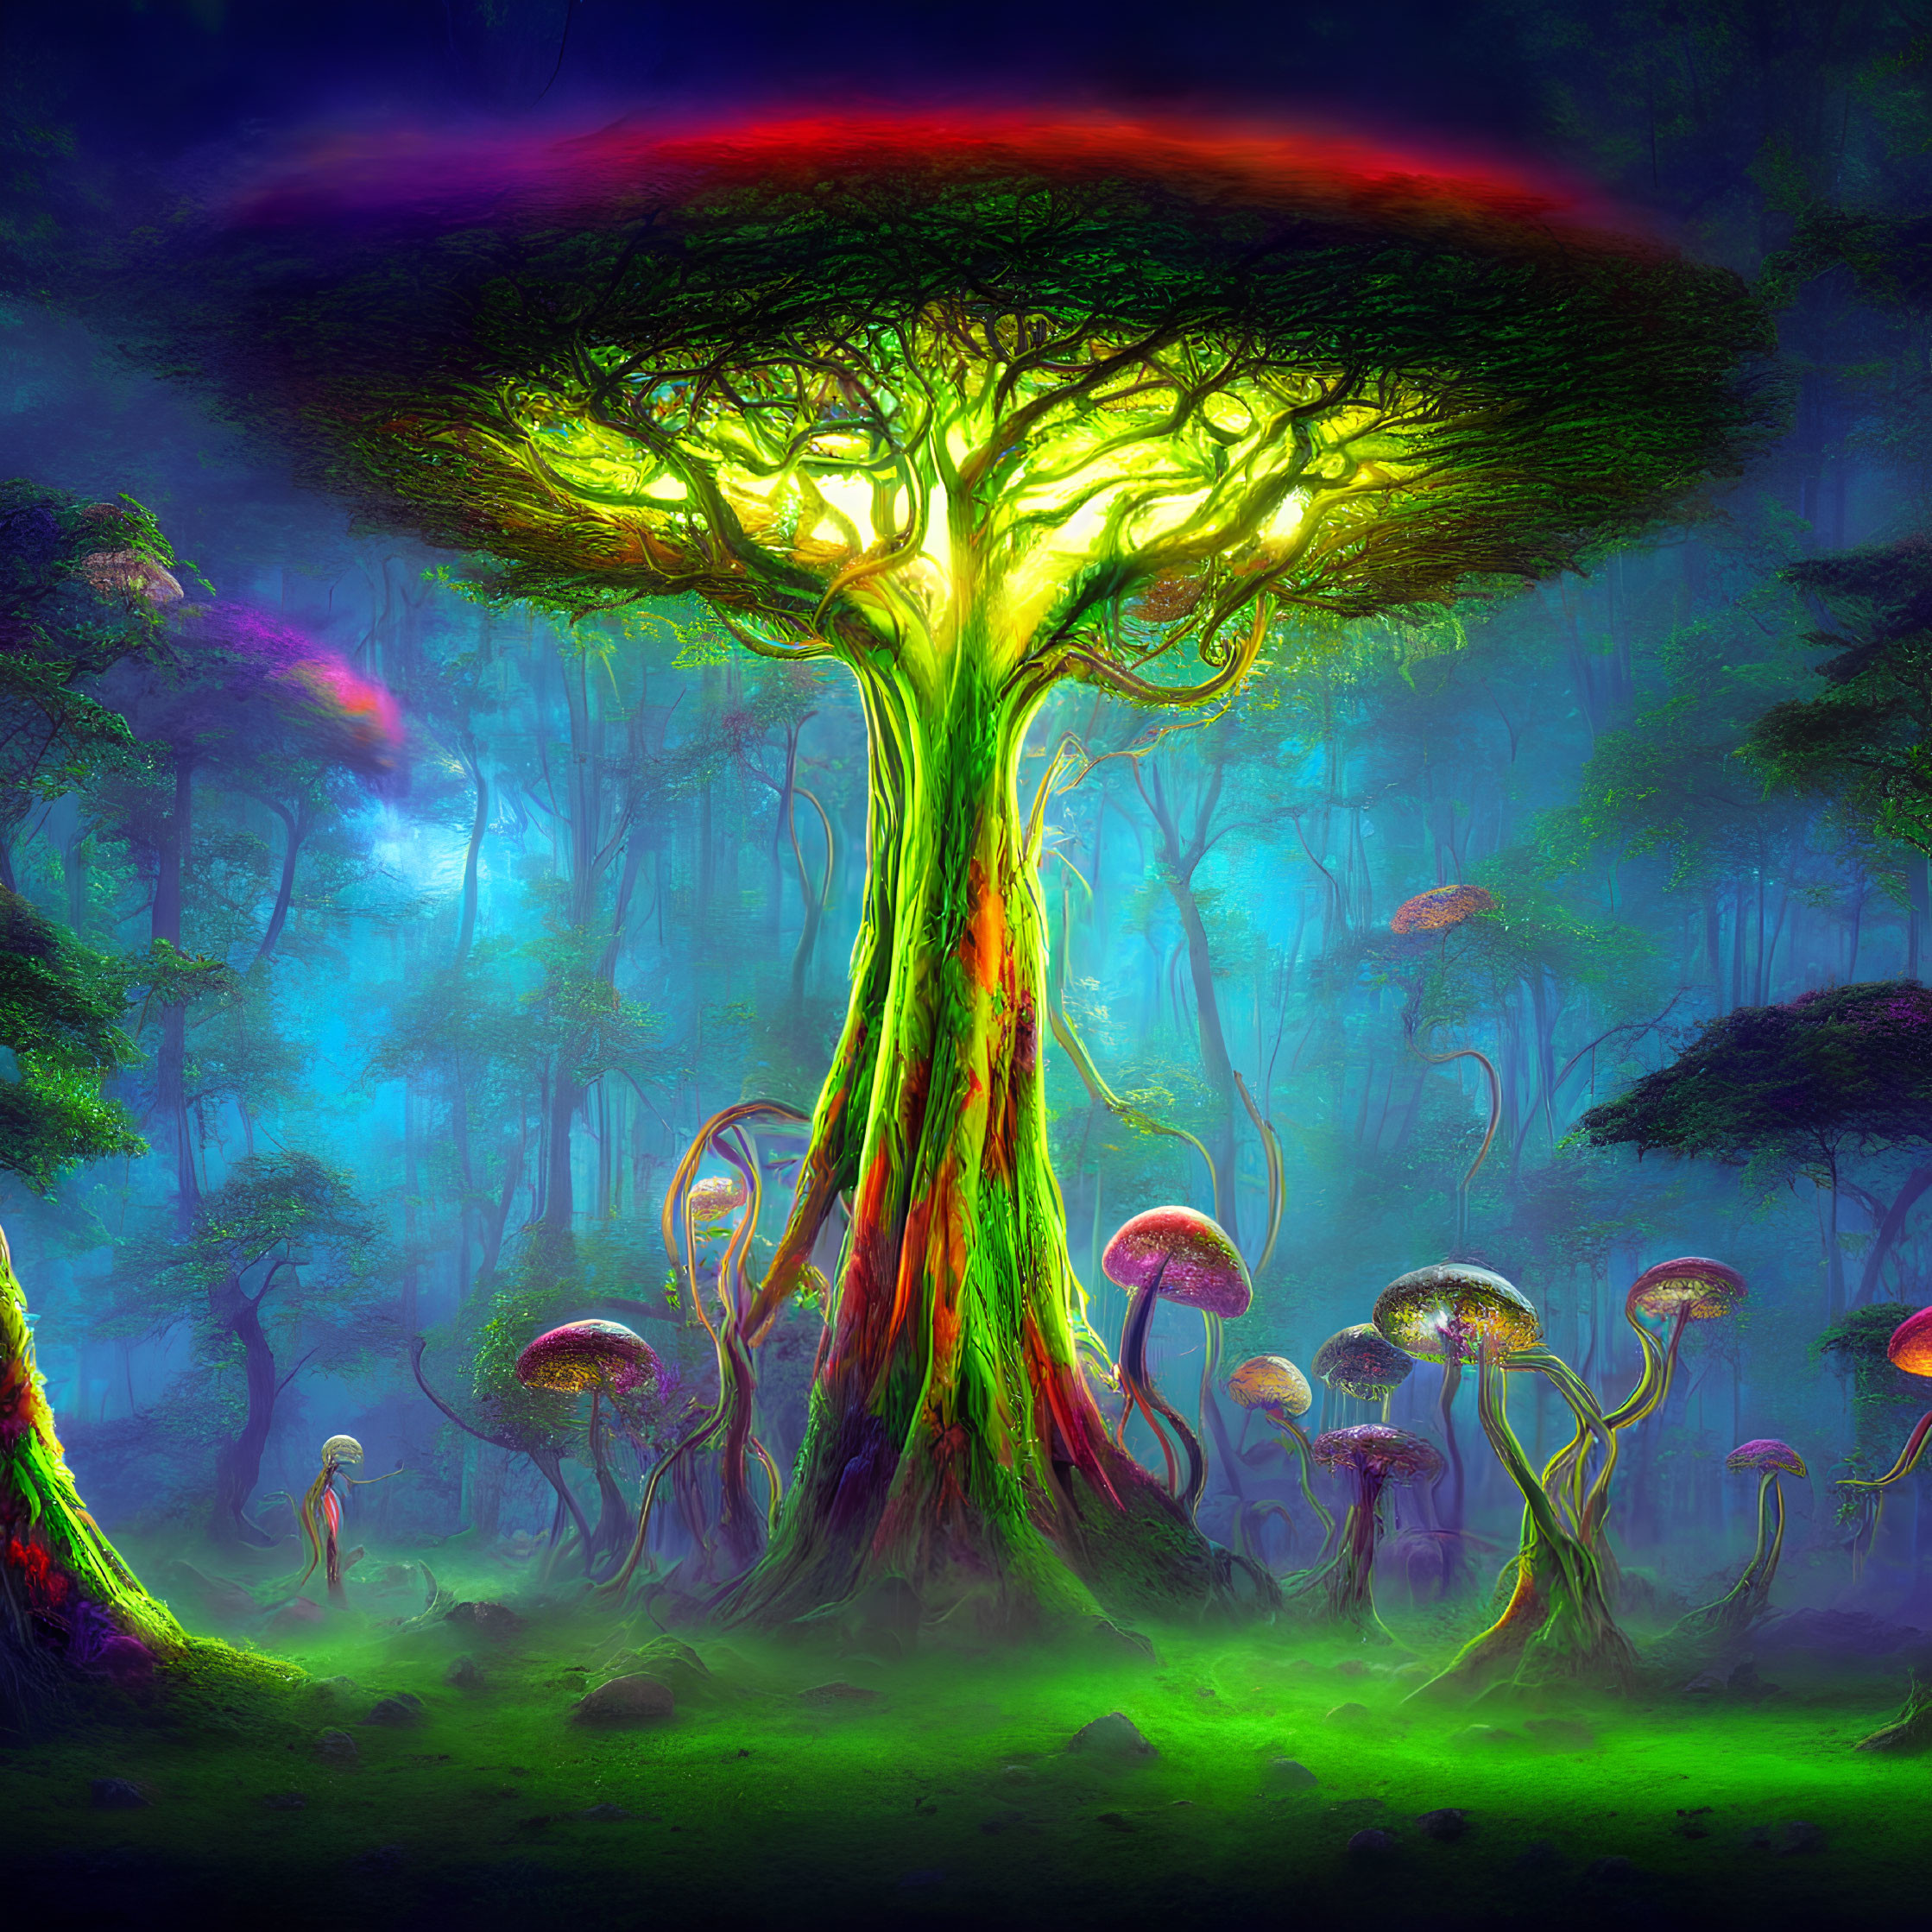 Luminous large tree in vibrant fantasy forest with glowing mushrooms